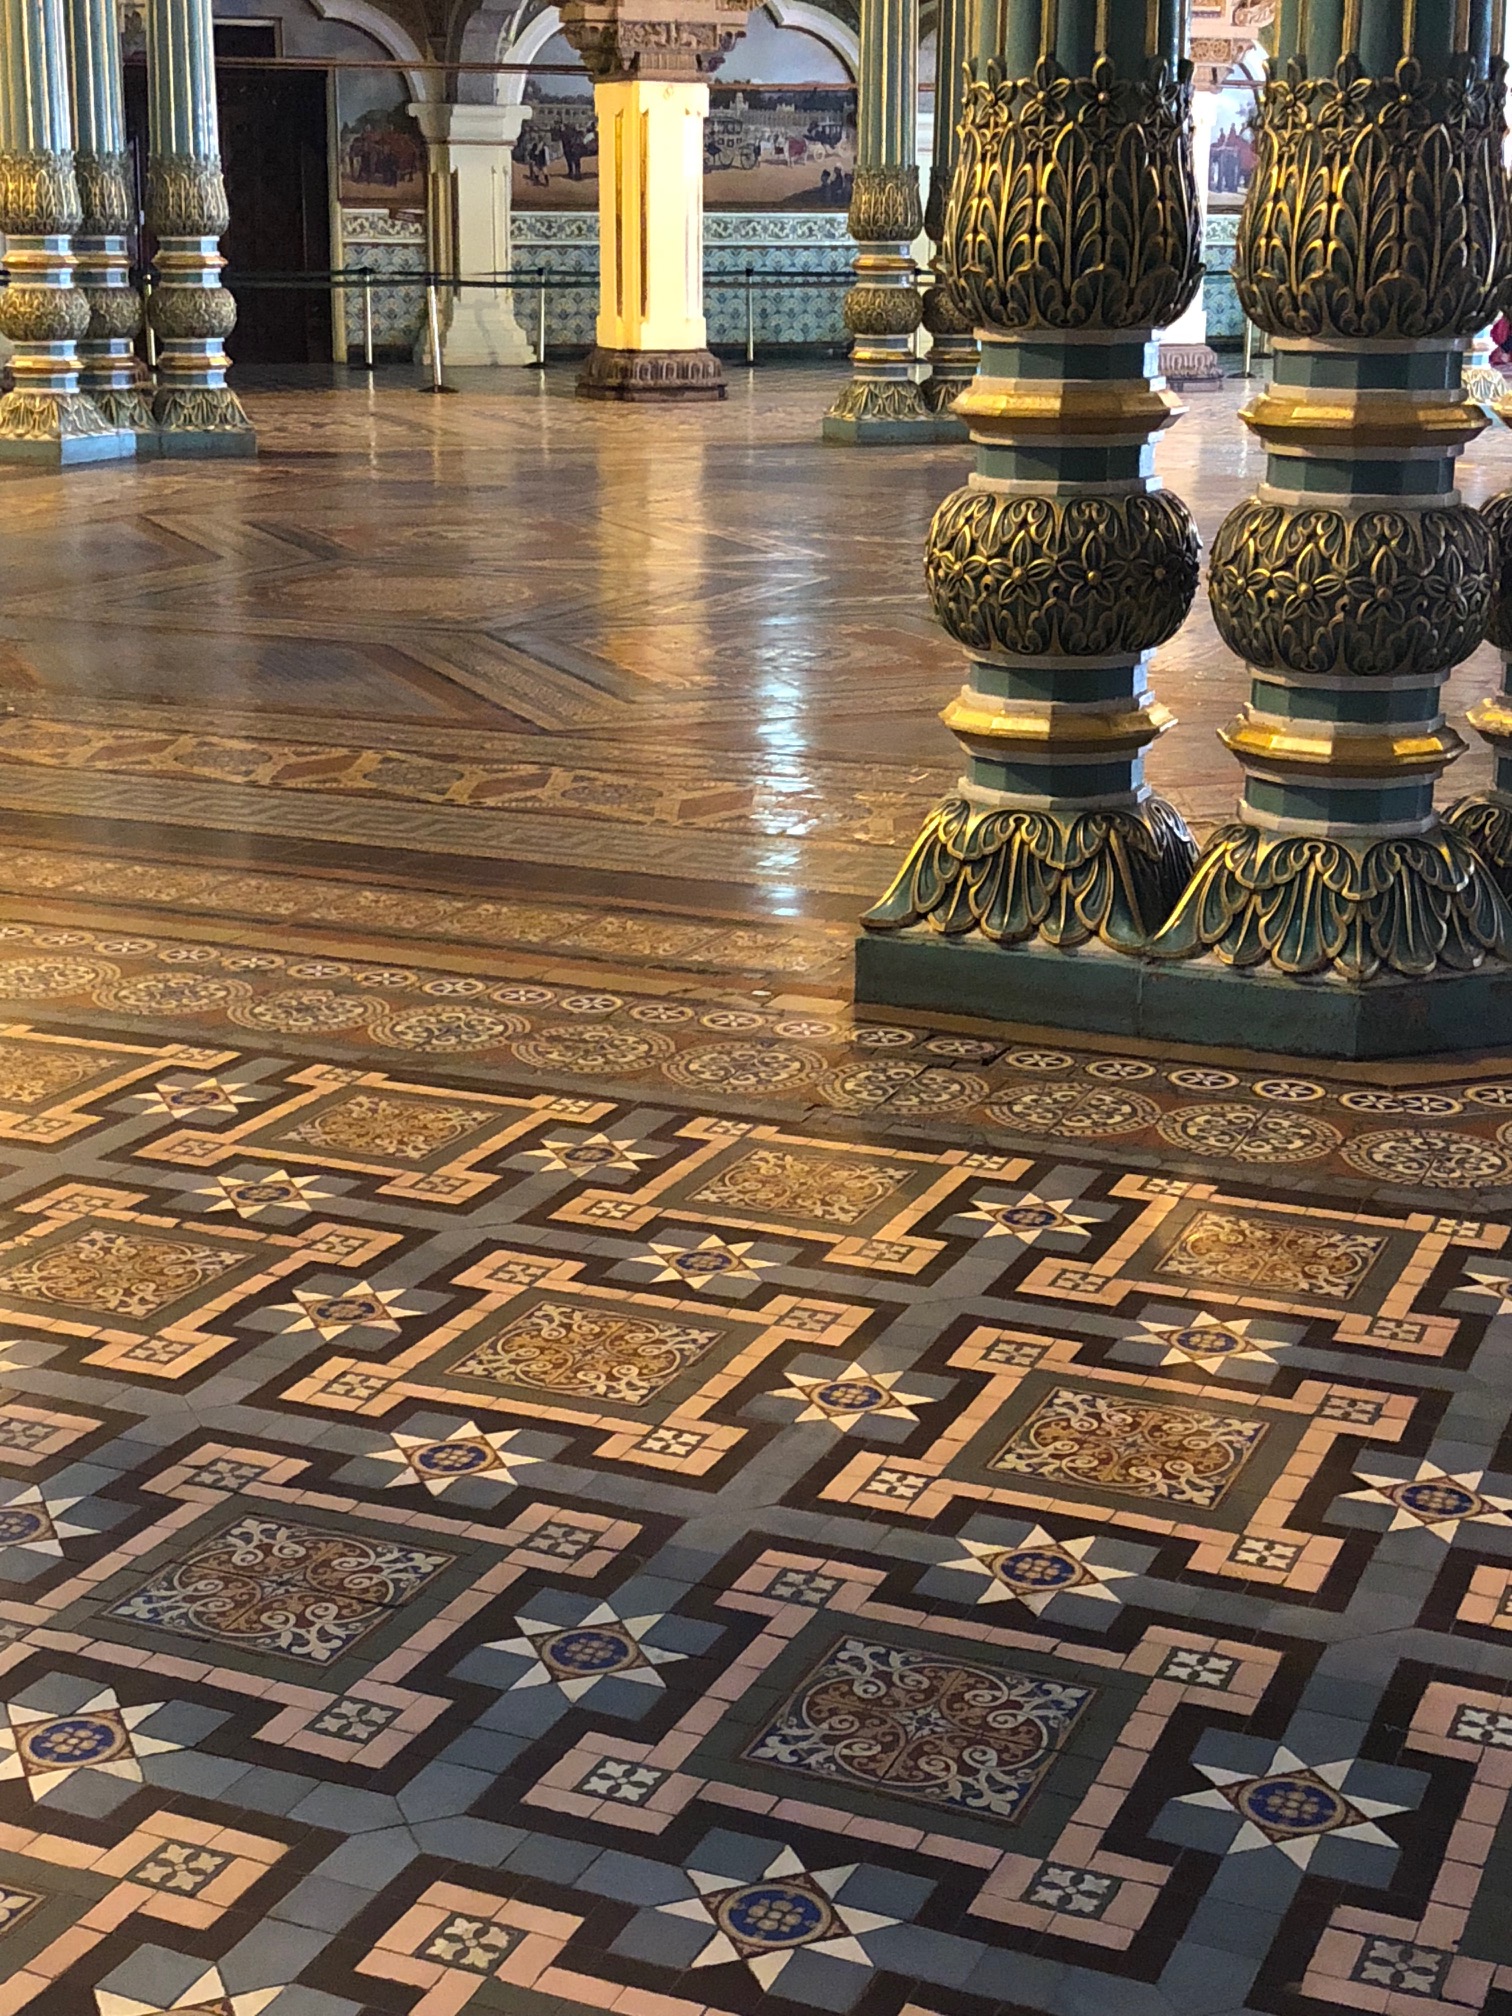 Green columns are painted with gold accents giving the impression of foliage surround a large tiled octagonal floor.